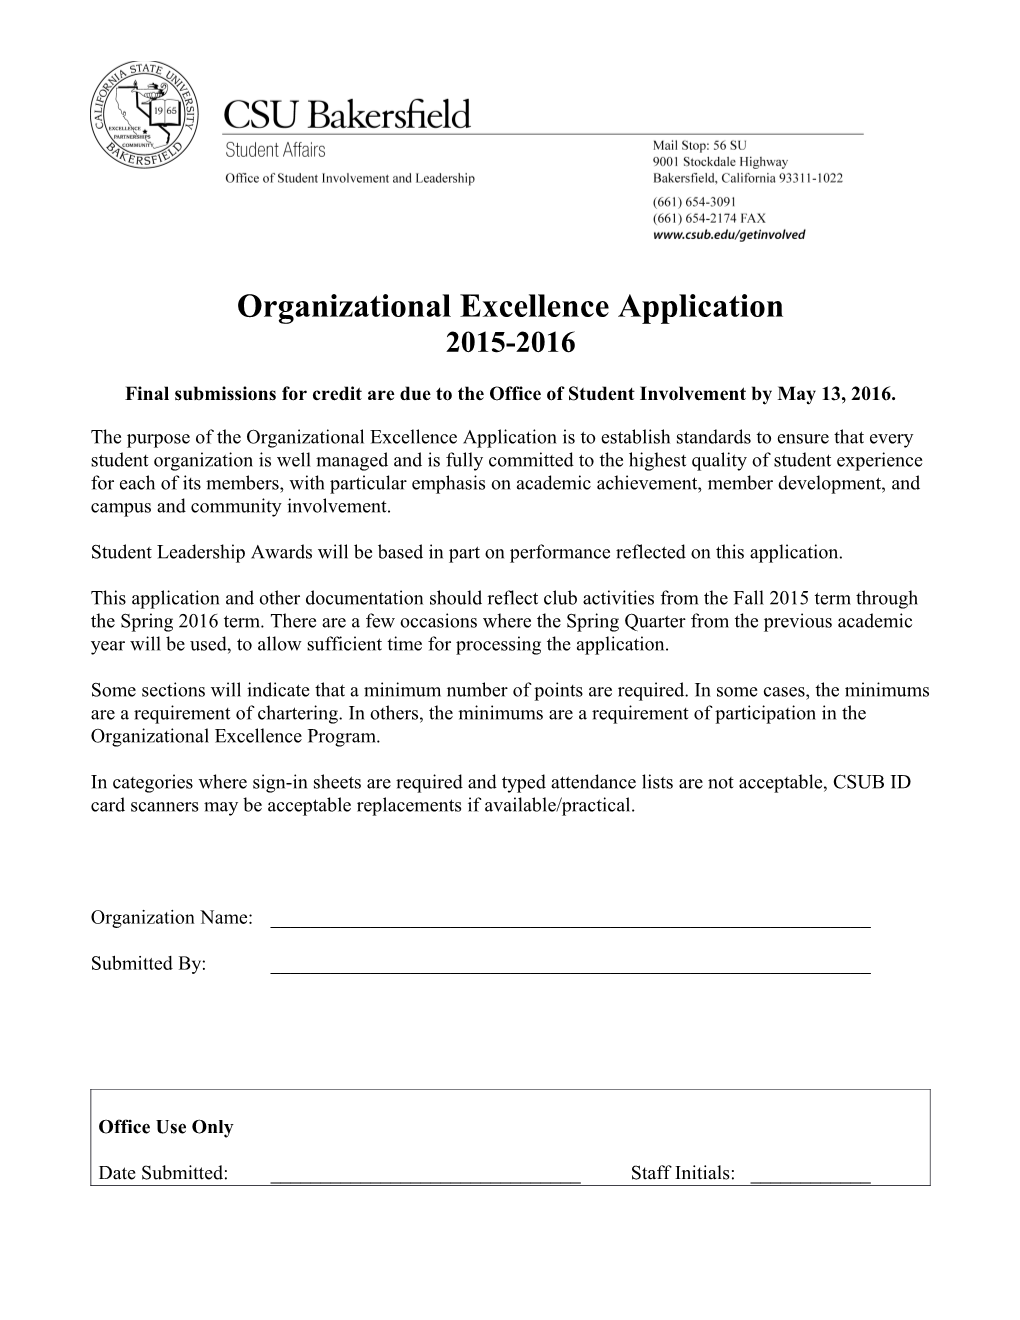 Organizational Excellence Applicationpage 1